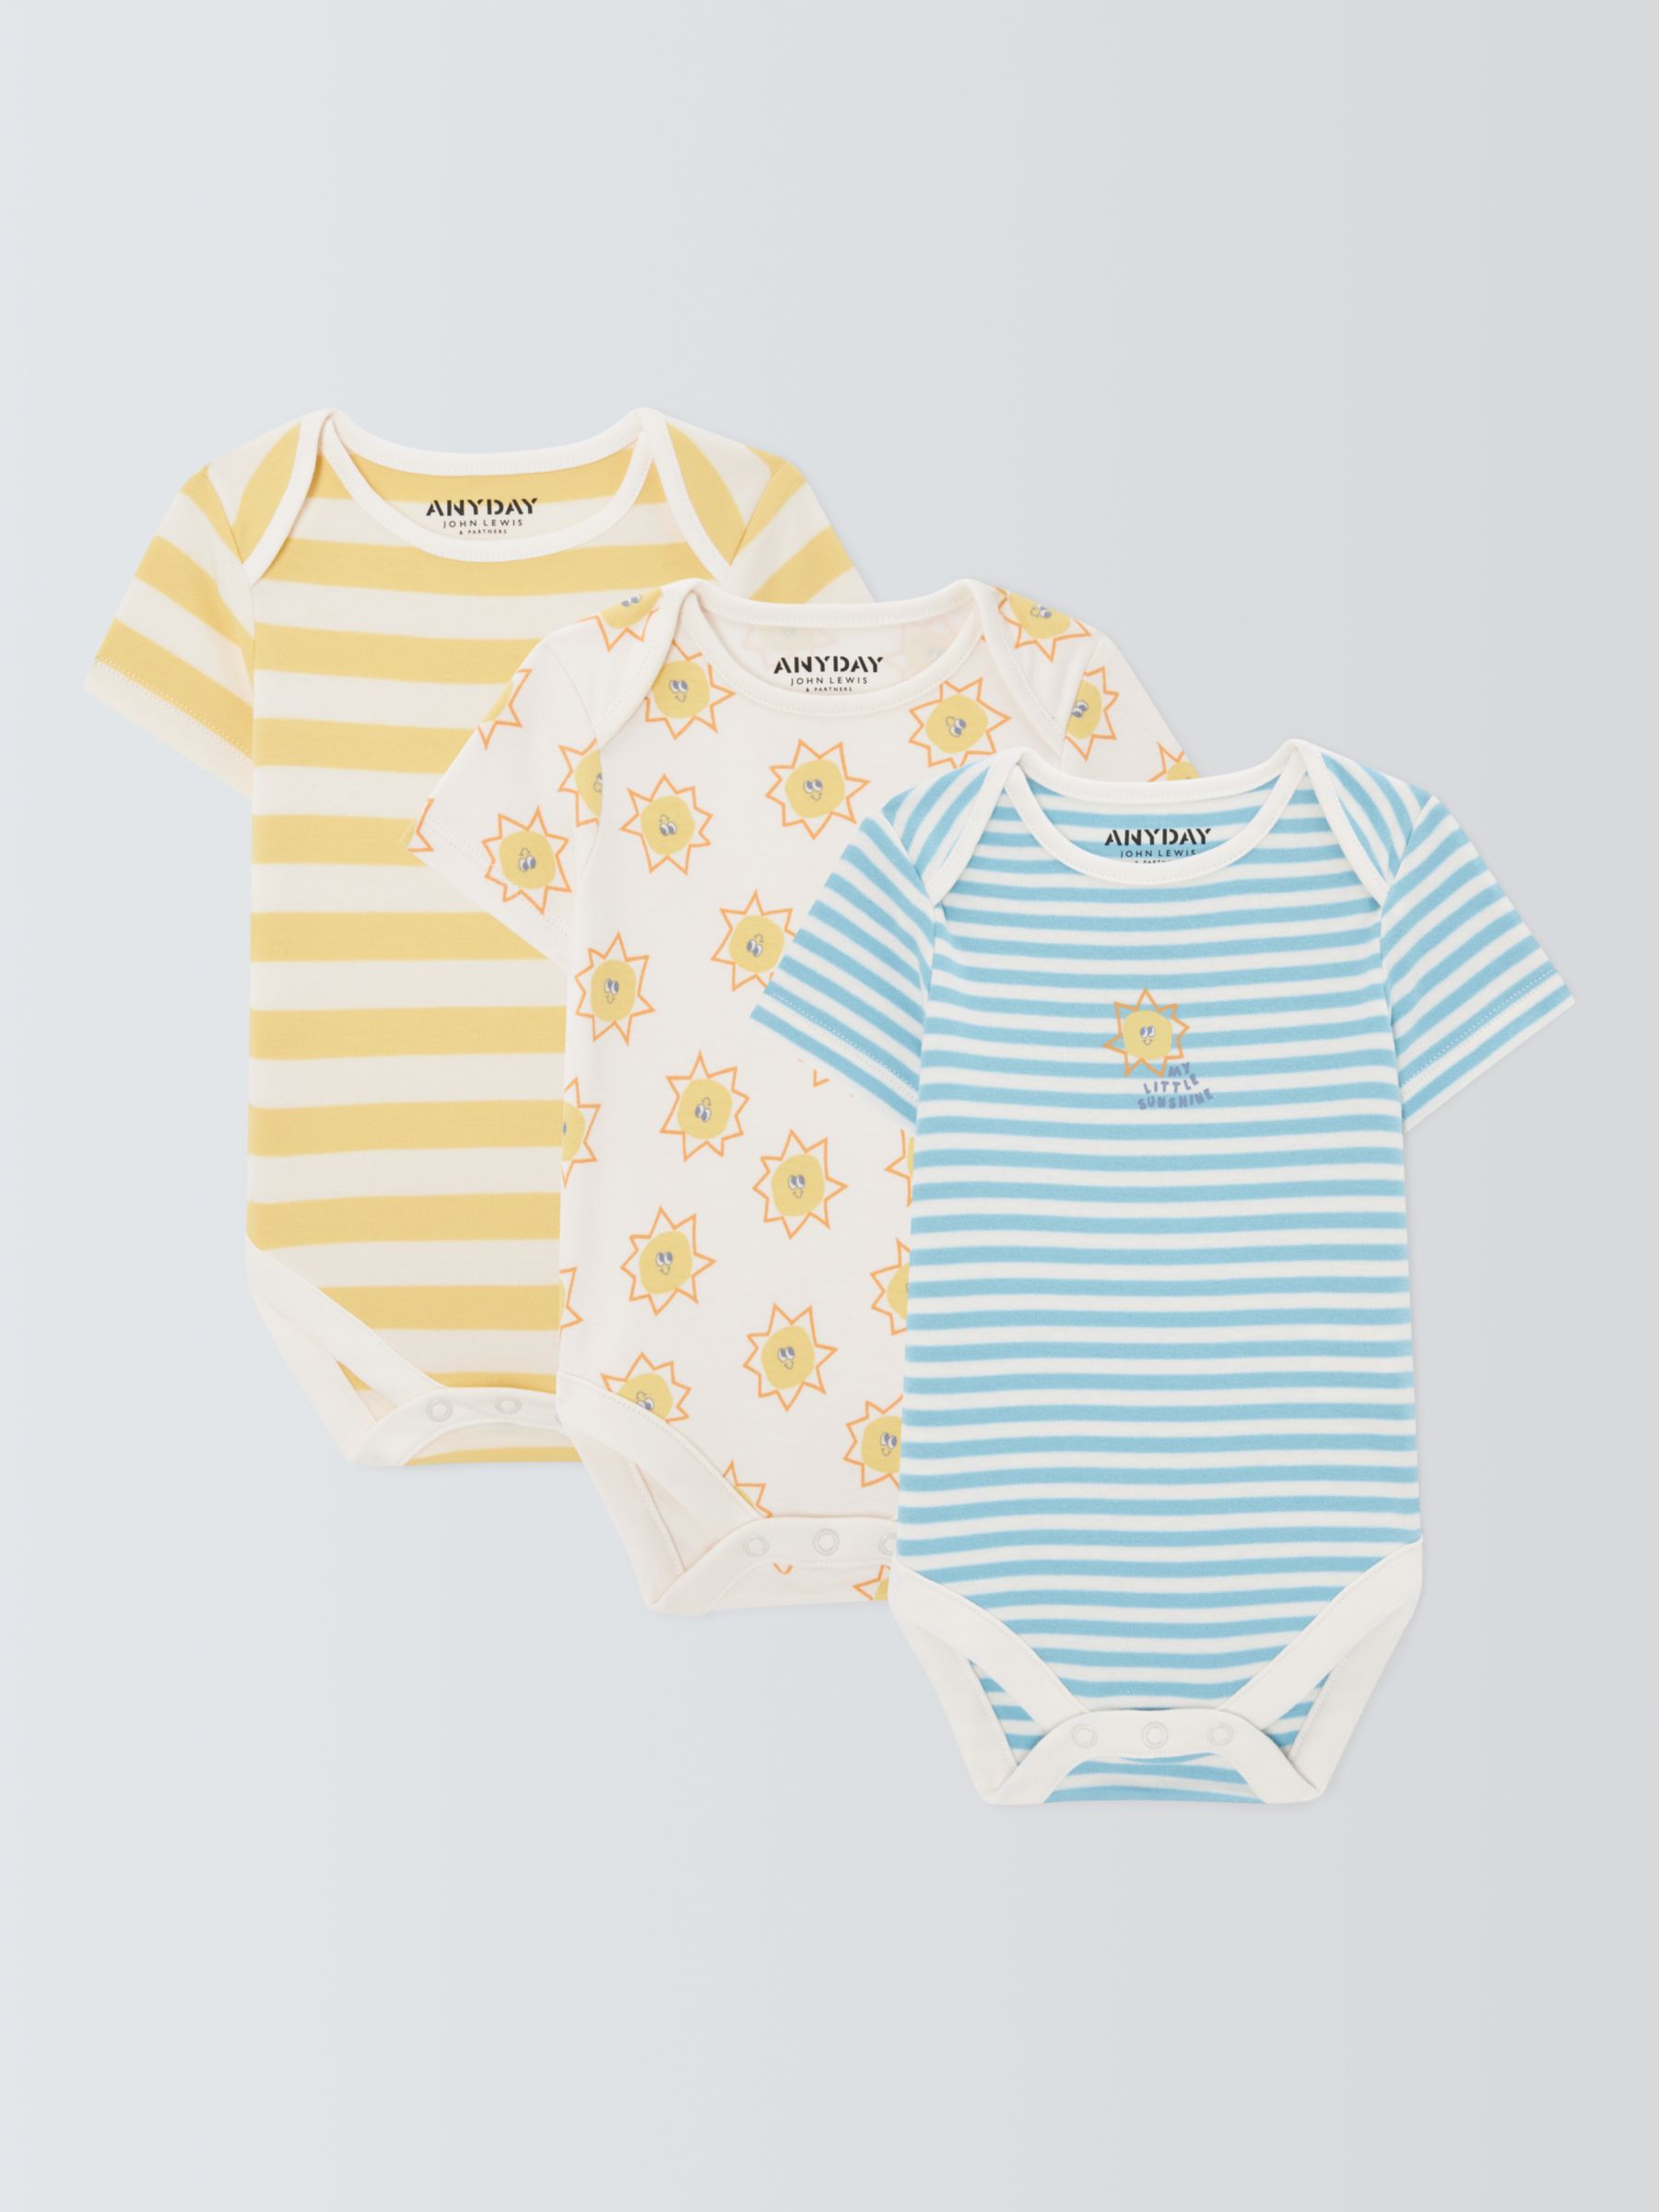 John Lewis ANYDAY Baby Printed Bodysuit, Pack of 3, Multi, 6-9 months